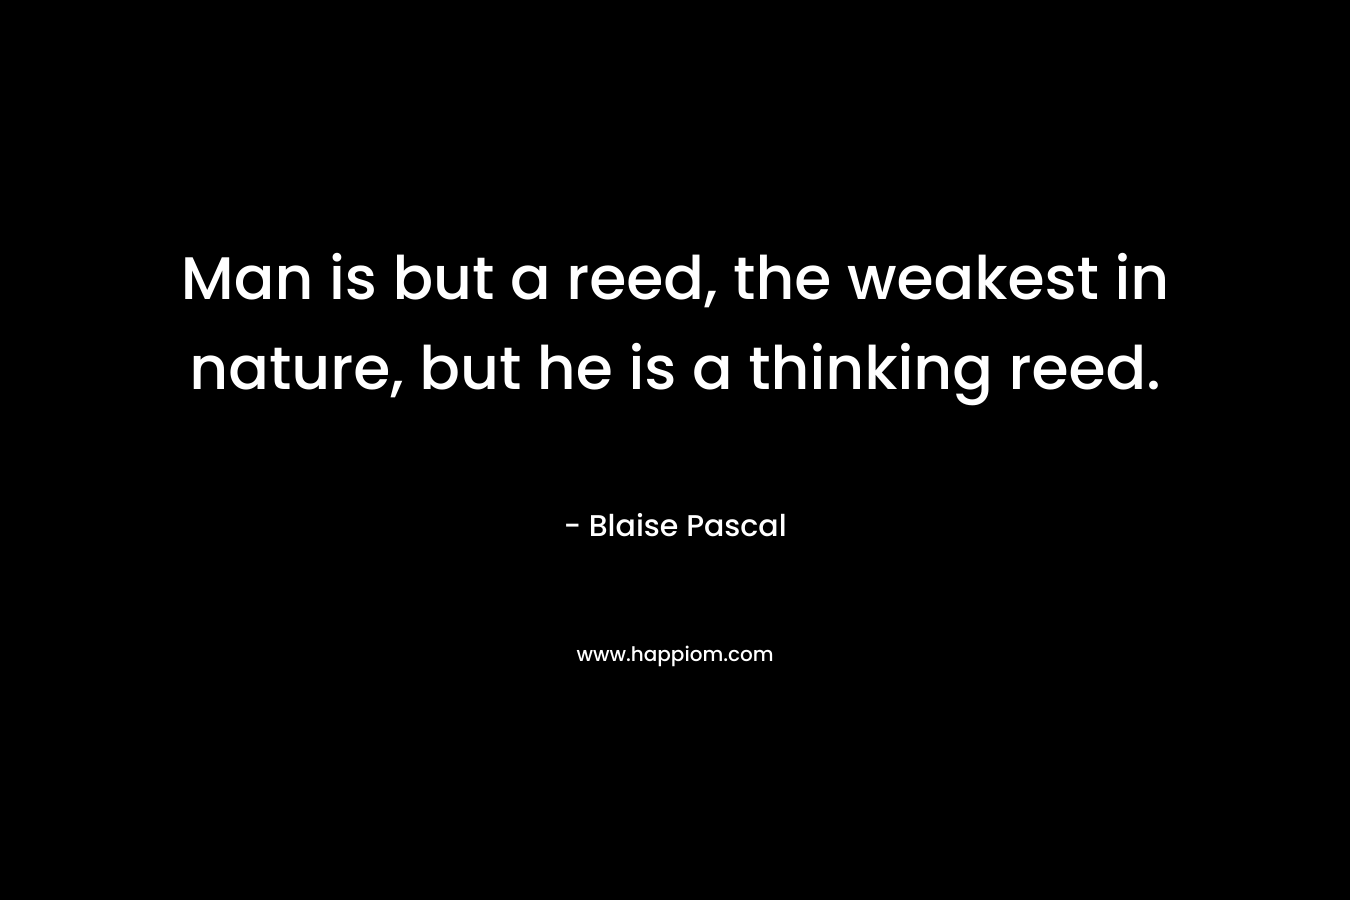 Man is but a reed, the weakest in nature, but he is a thinking reed.